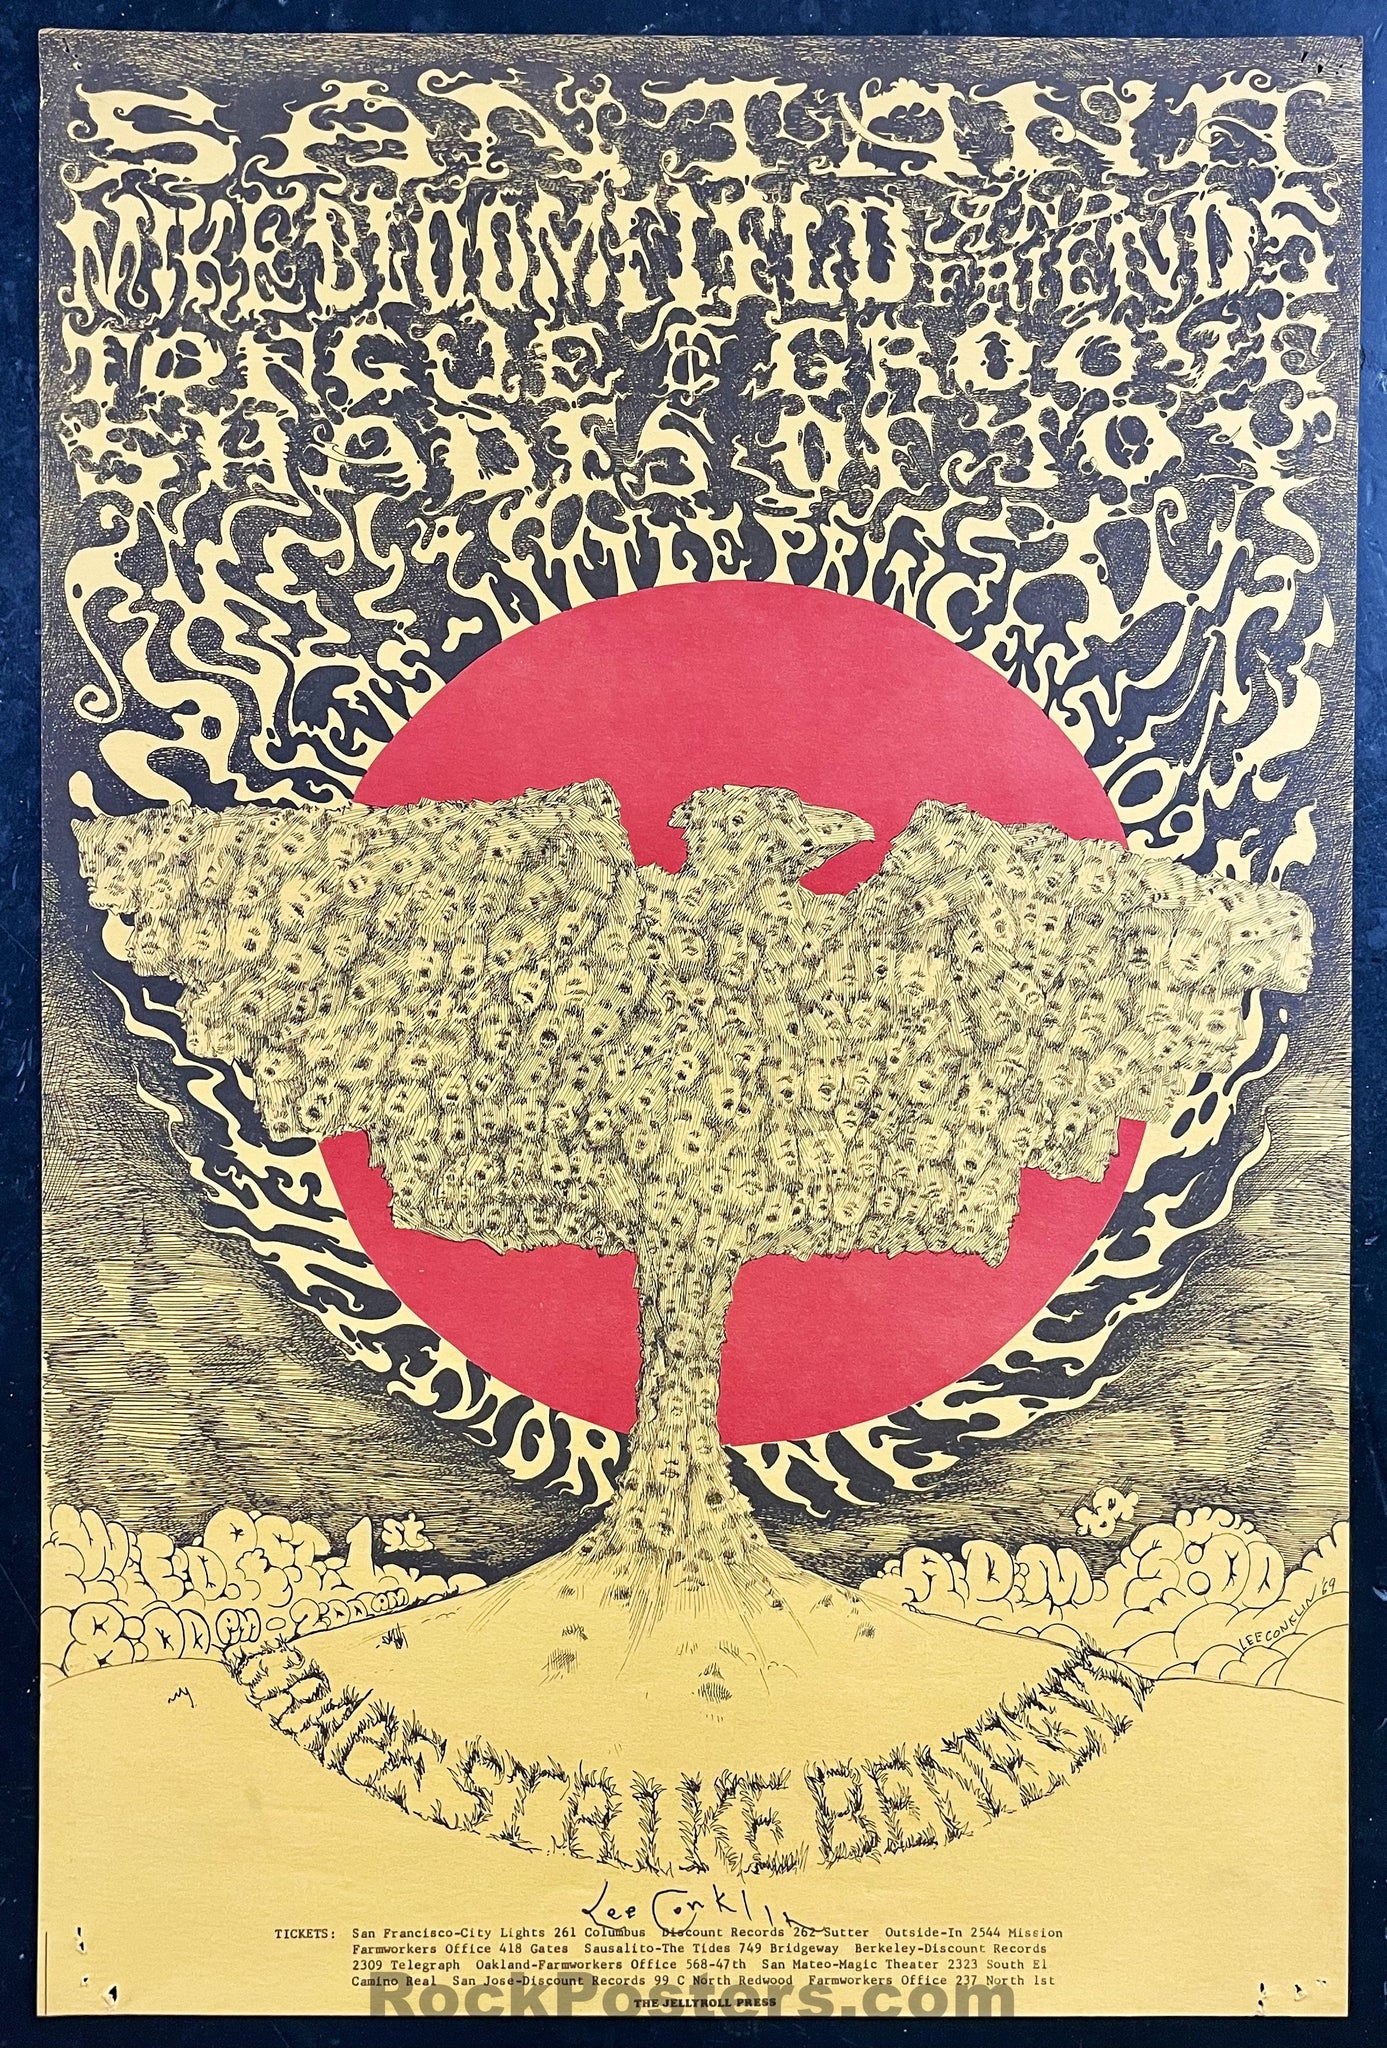 AUCTION - AOR 2.78 - Santana - Grape Workers Strike Benefit -  Lee Conklin Signed - 1969 Poster - Fillmore West - Very Good